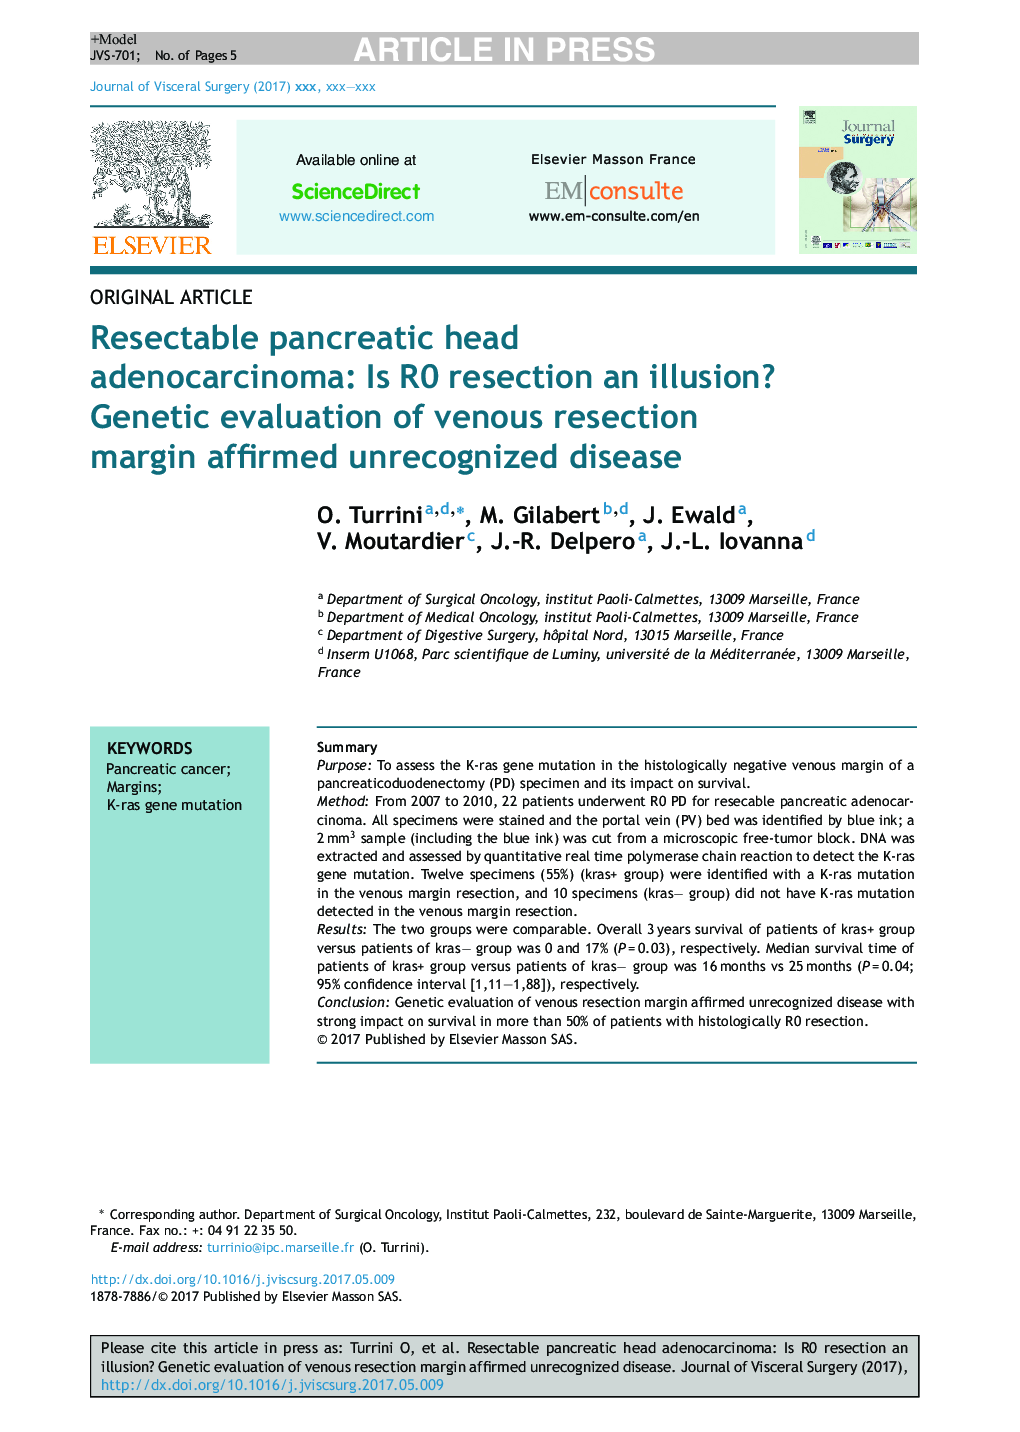 Resectable pancreatic head adenocarcinoma: Is R0 resection an illusion? Genetic evaluation of venous resection margin affirmed unrecognized disease